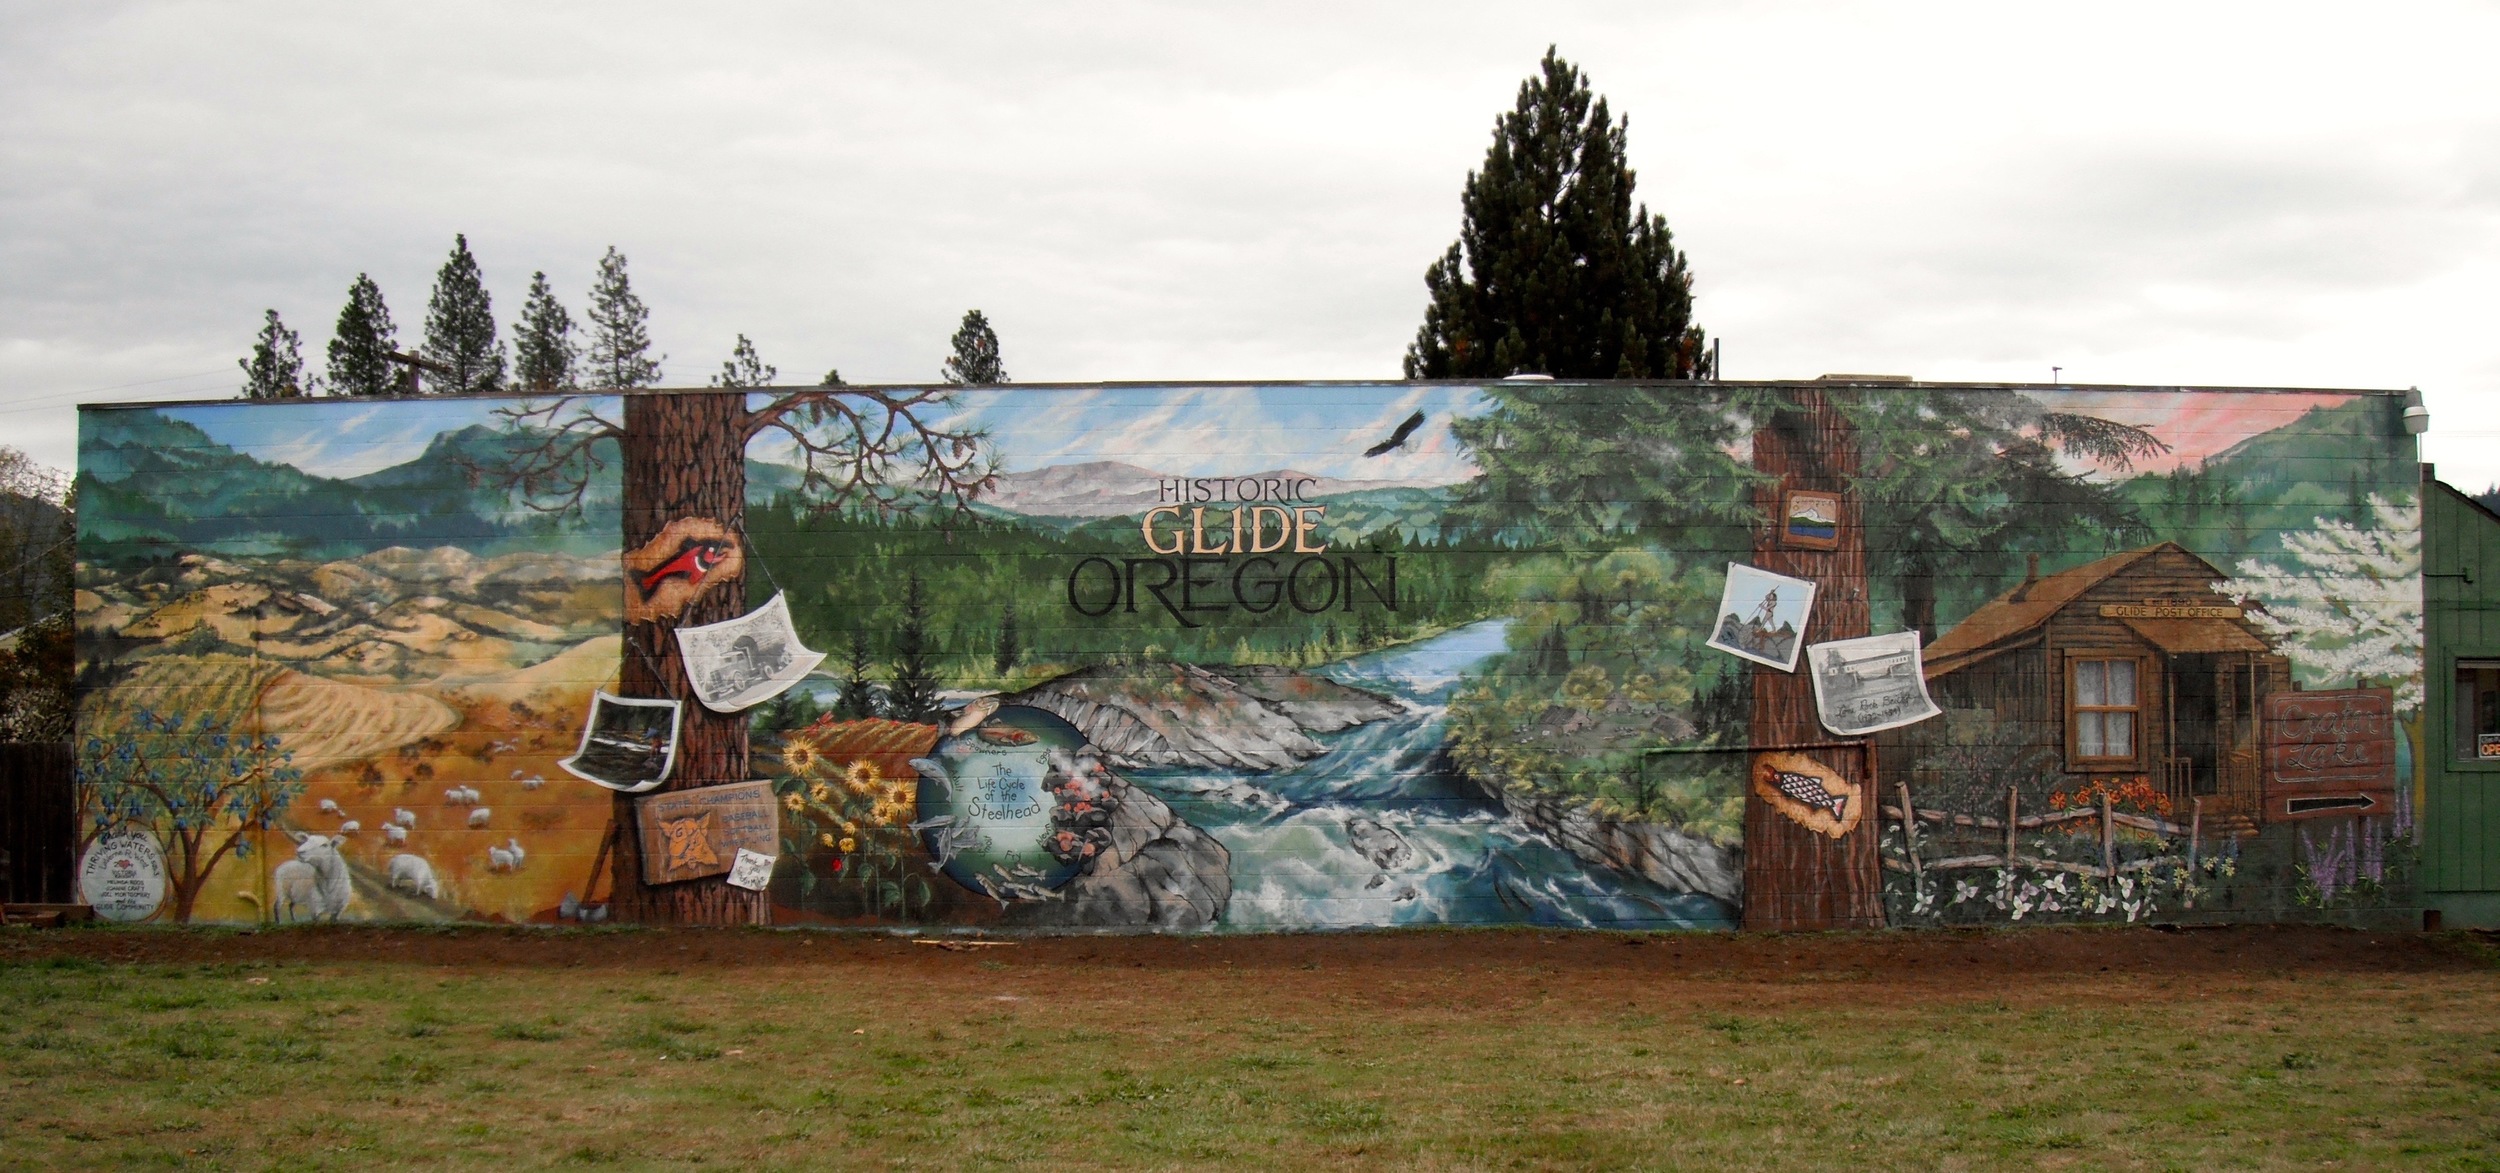  GLIDE, OR   COMMUNITY MURALS    Learn more  